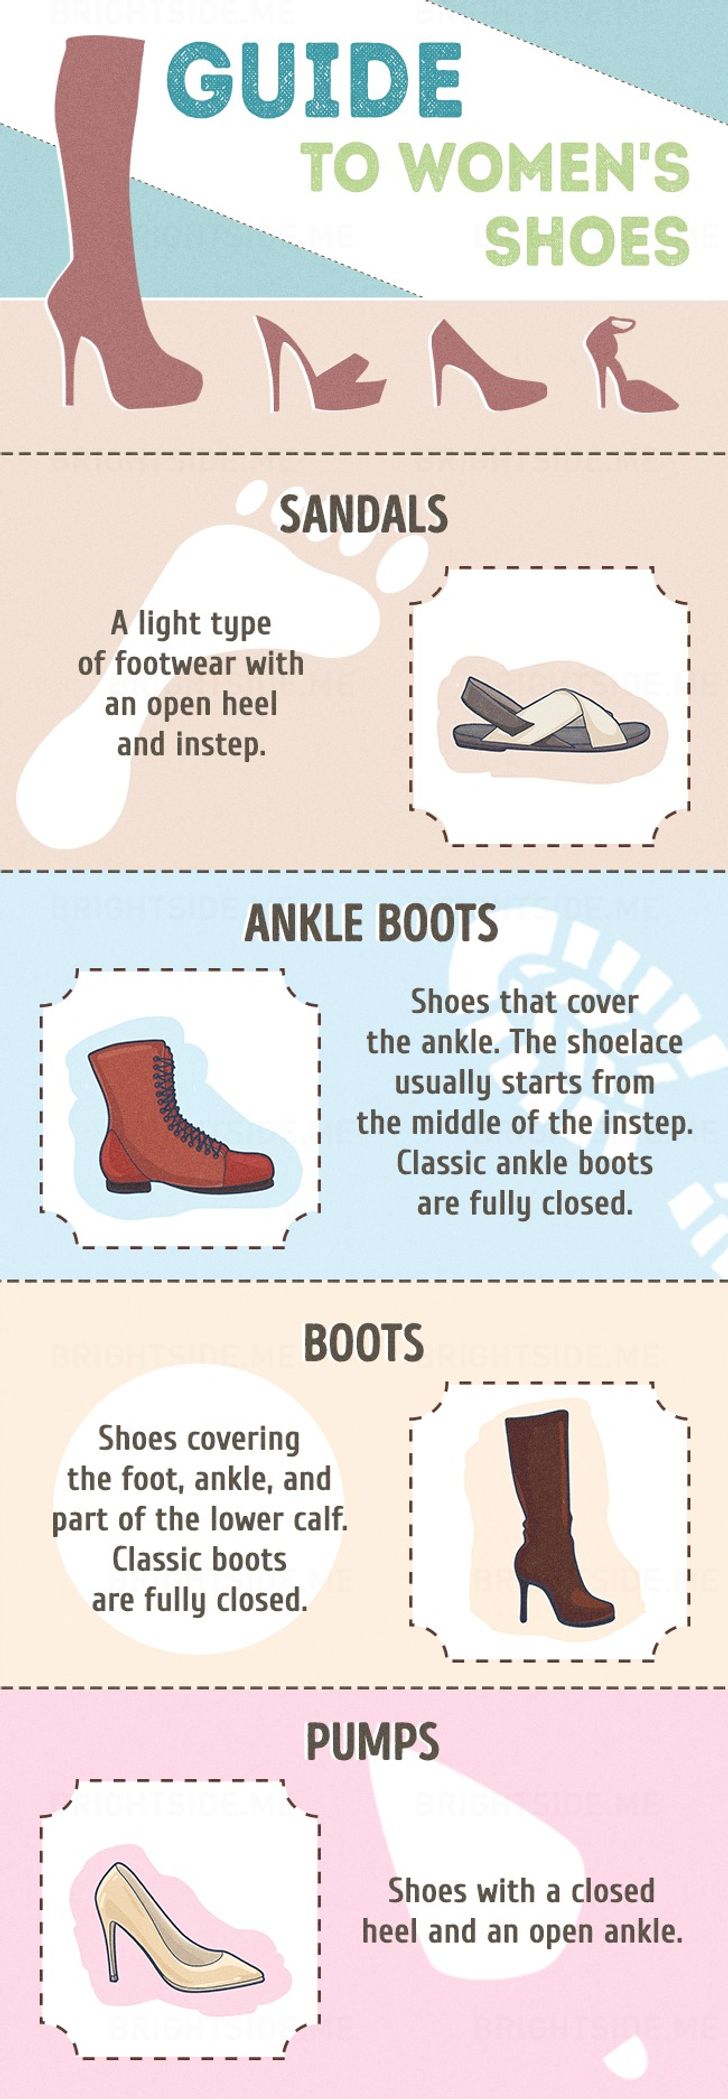 An amazing style guide to women's shoes